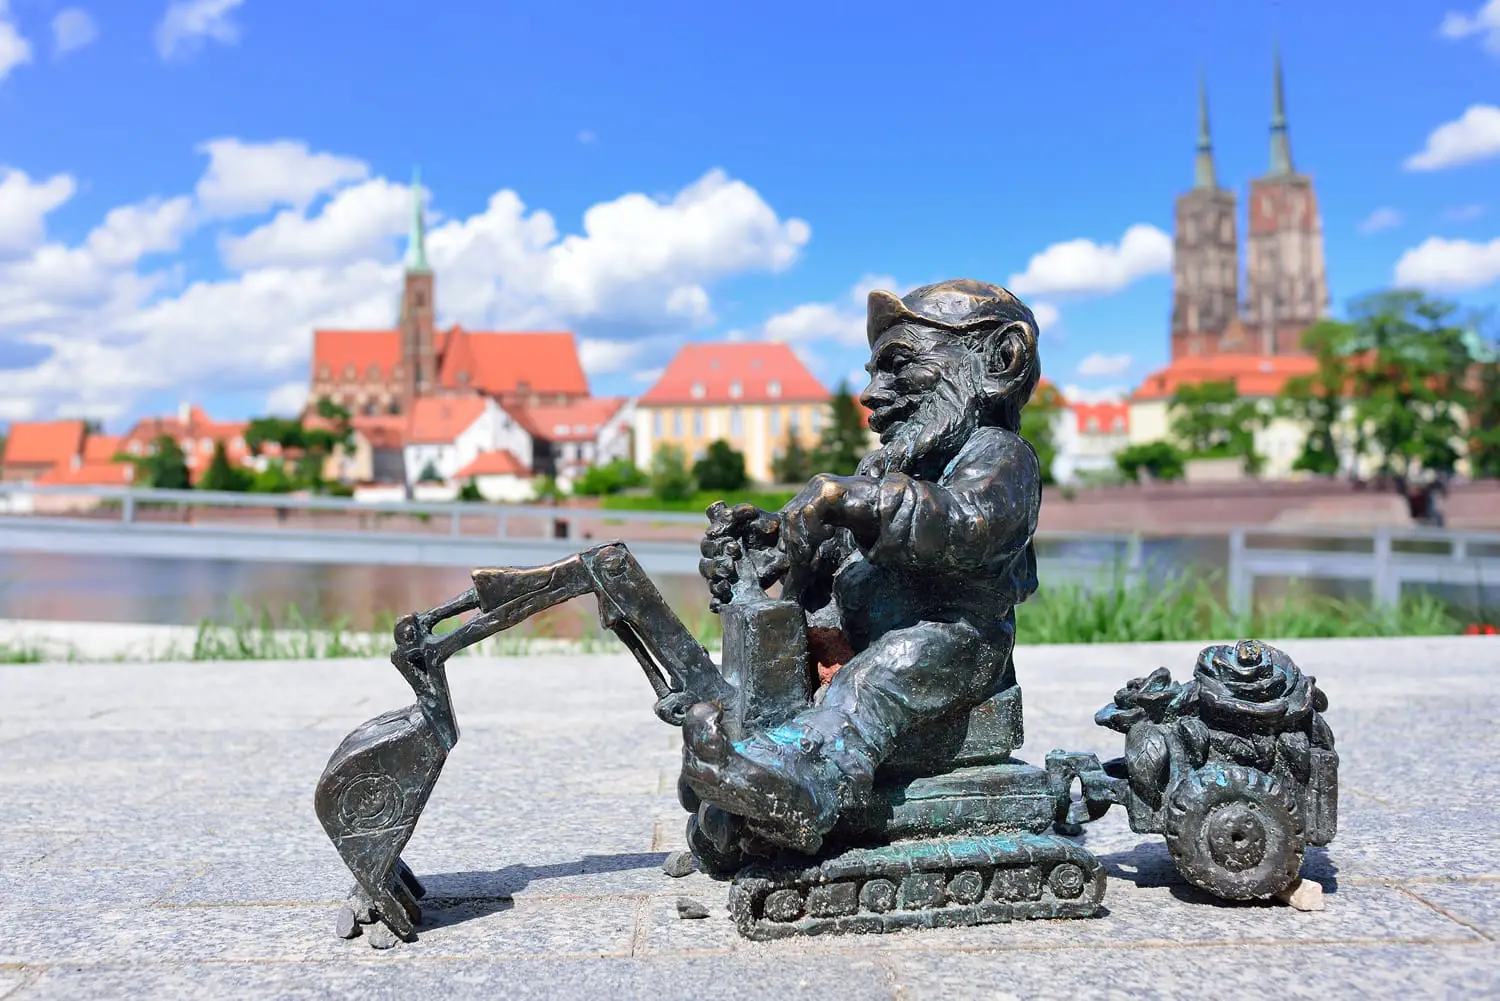 A small gnome sculpture in the background of the panorama of Wroclaw.